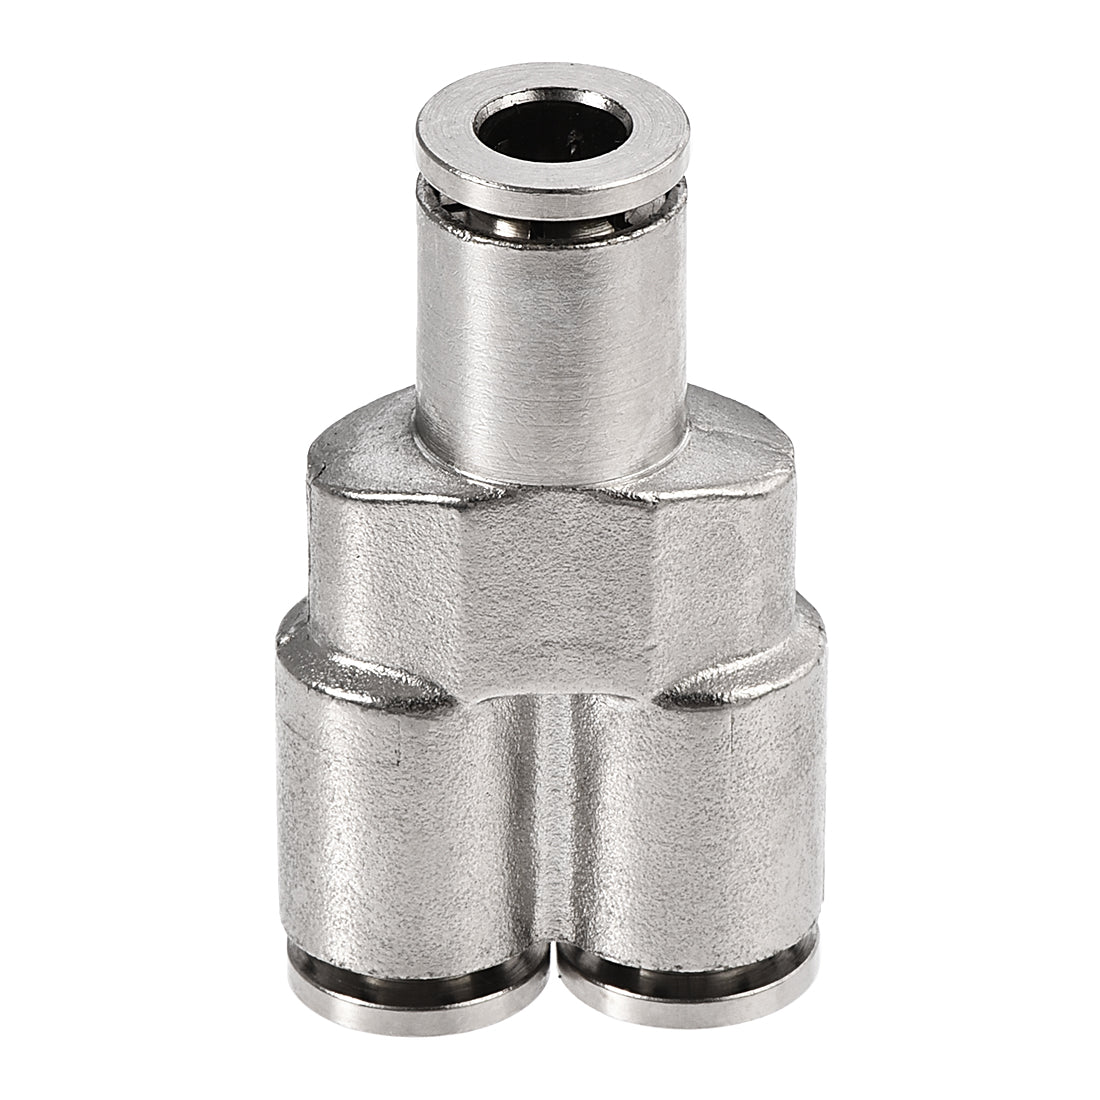 uxcell Uxcell Push to Connect Fittings Y Type Connect 6mm OD Tube Fittings Silver Tone 2Pcs